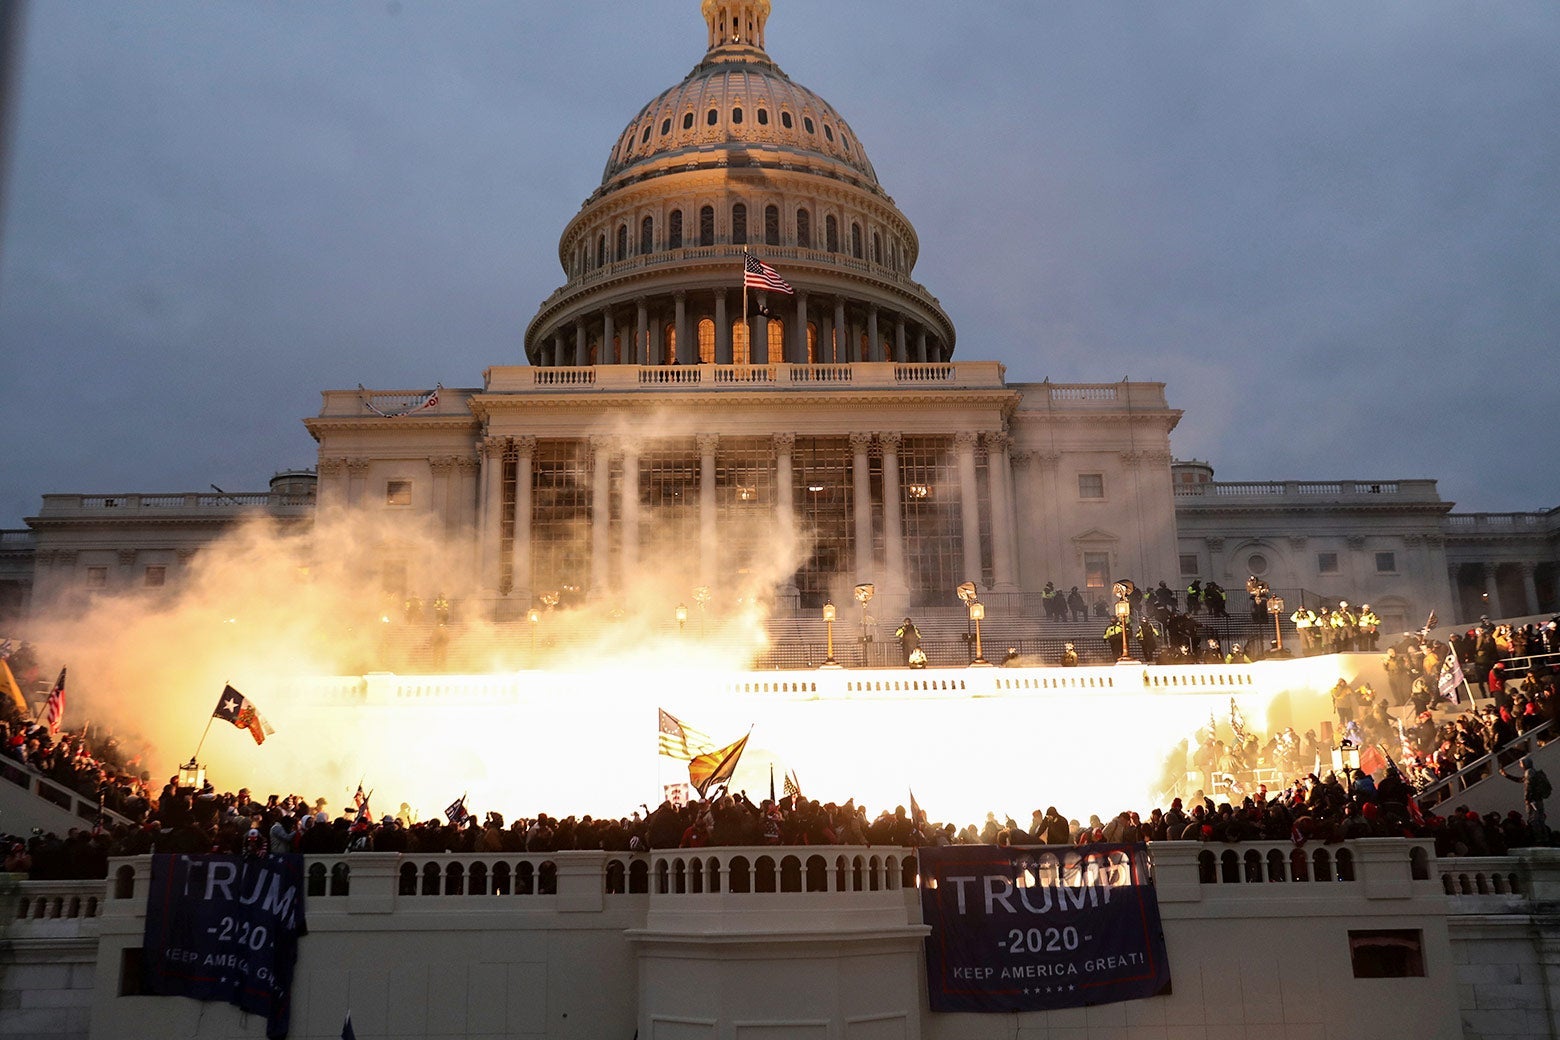 An explosion caused by a police munition is seen while supporters of U.S. President Donald Trump gather in front of the U.S. Capitol building.